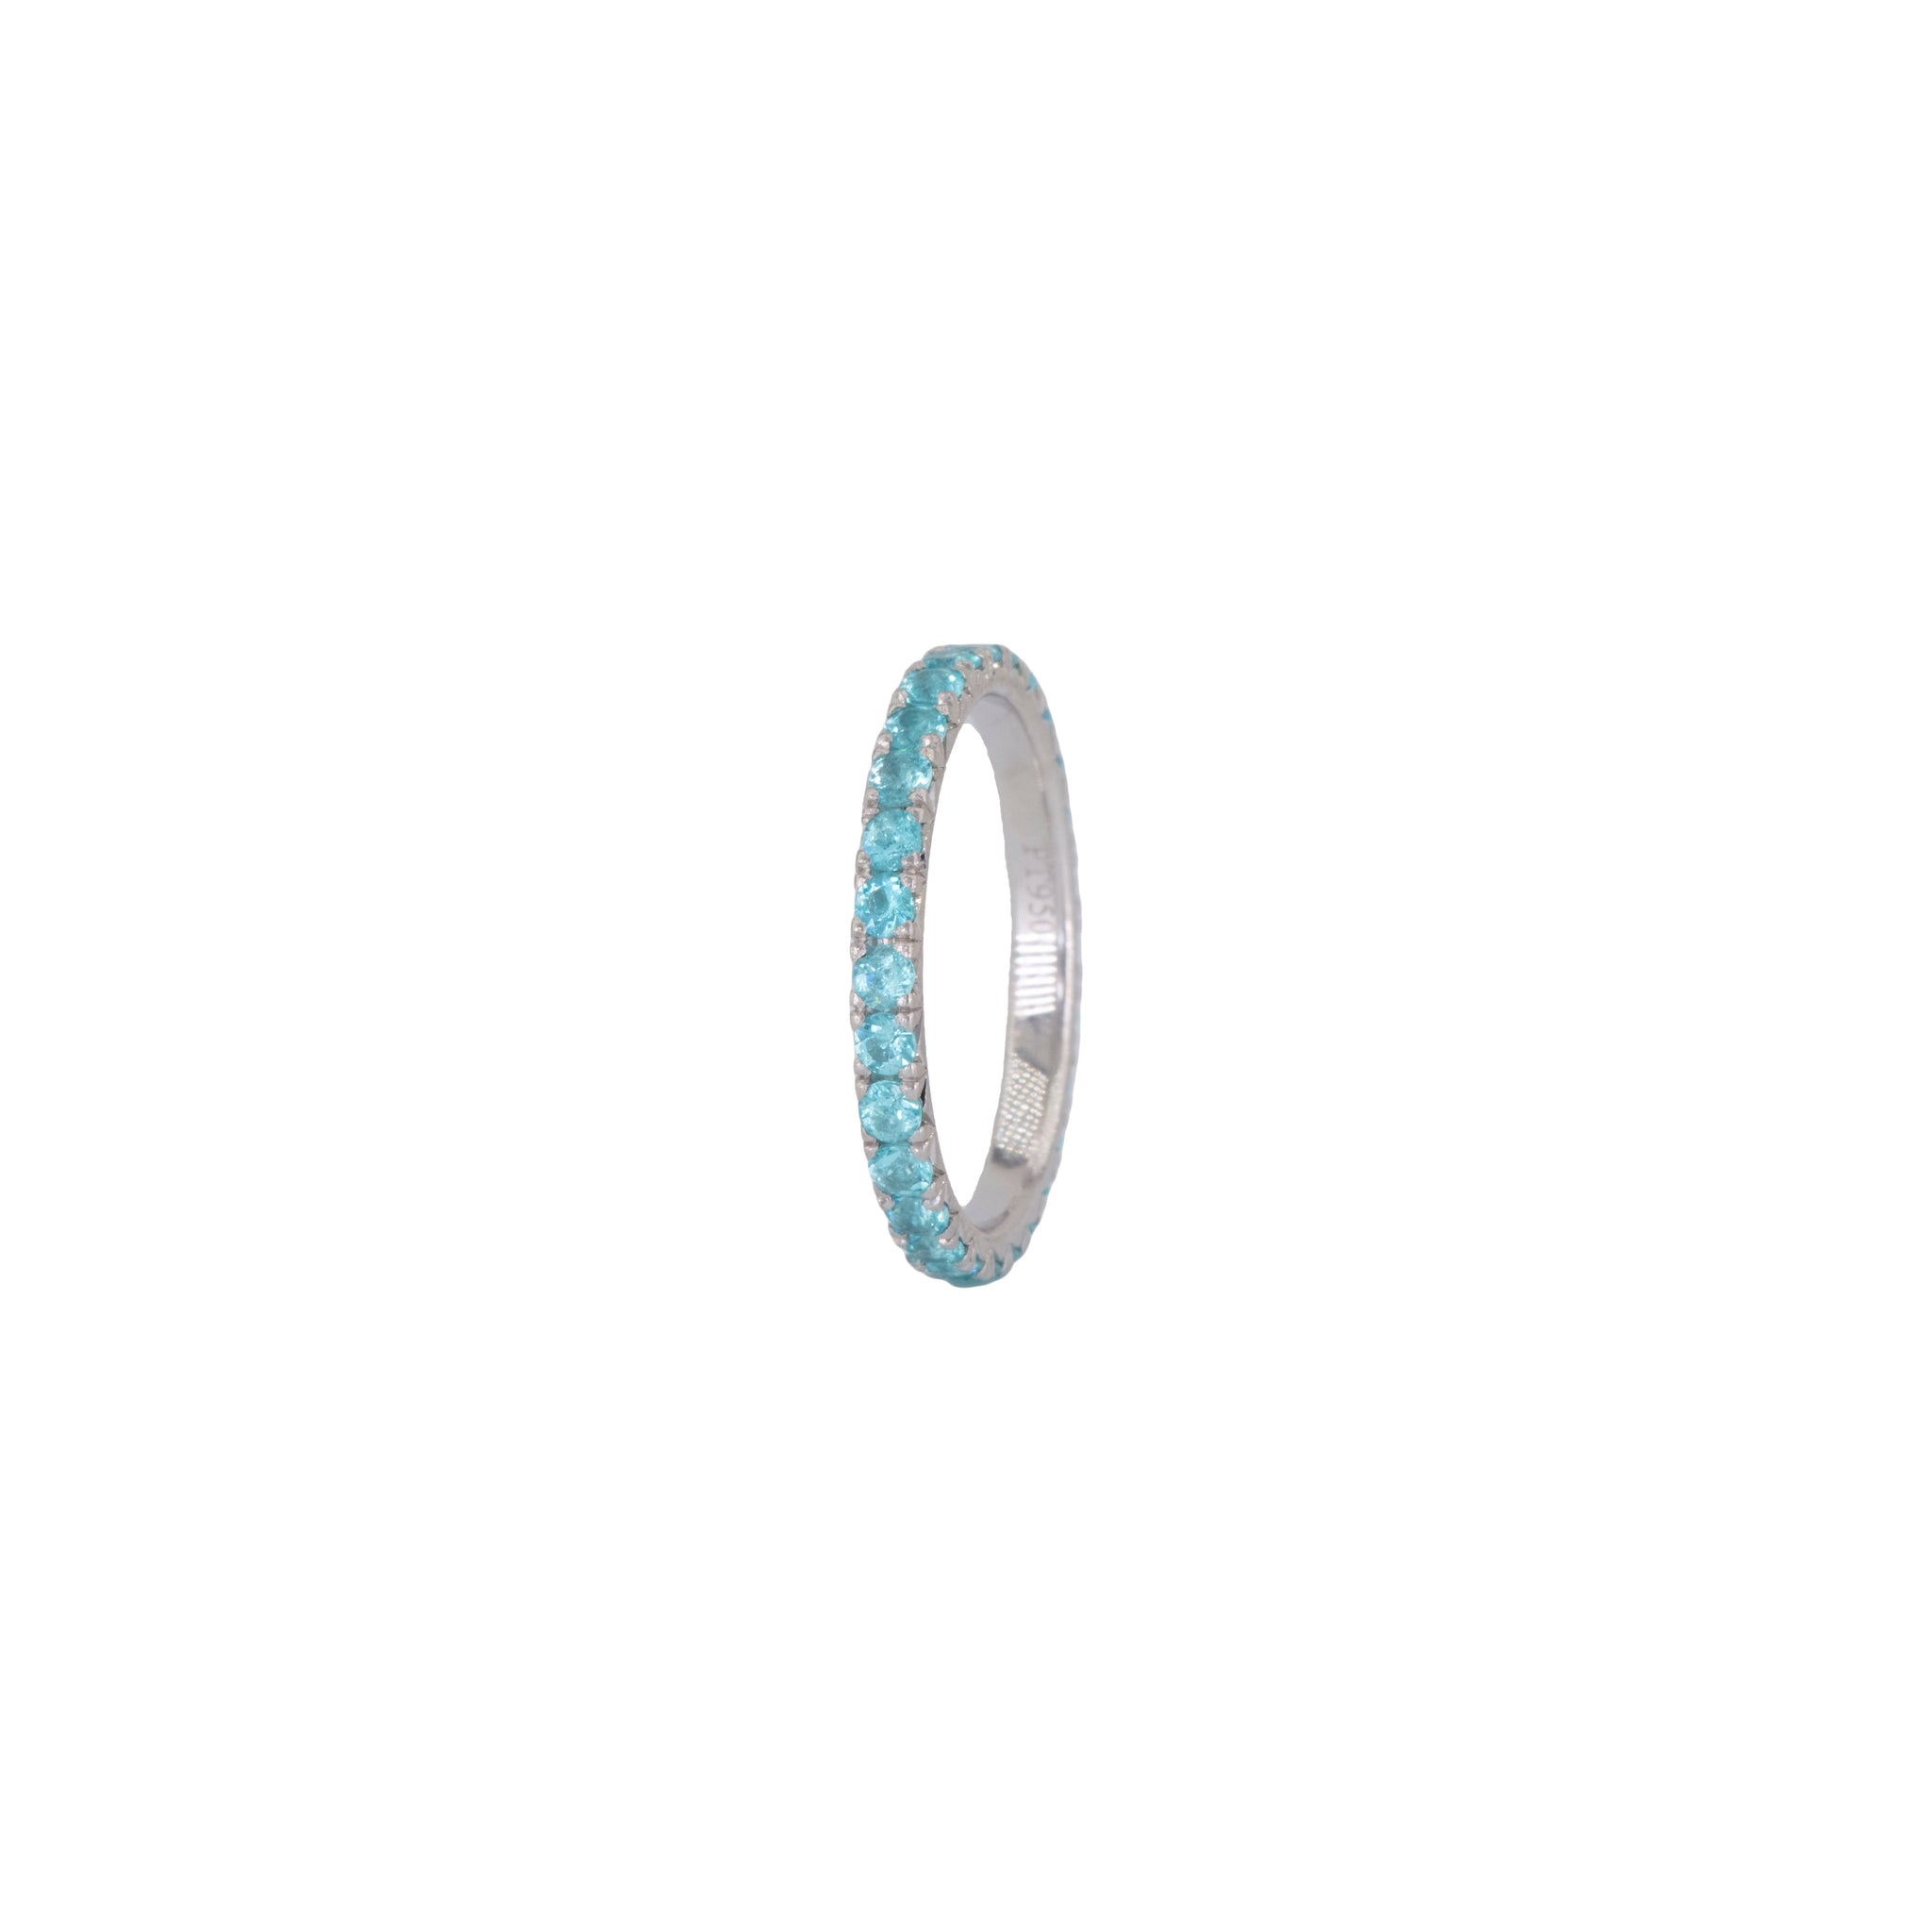 the bluètoile eternity ring *limited edition*